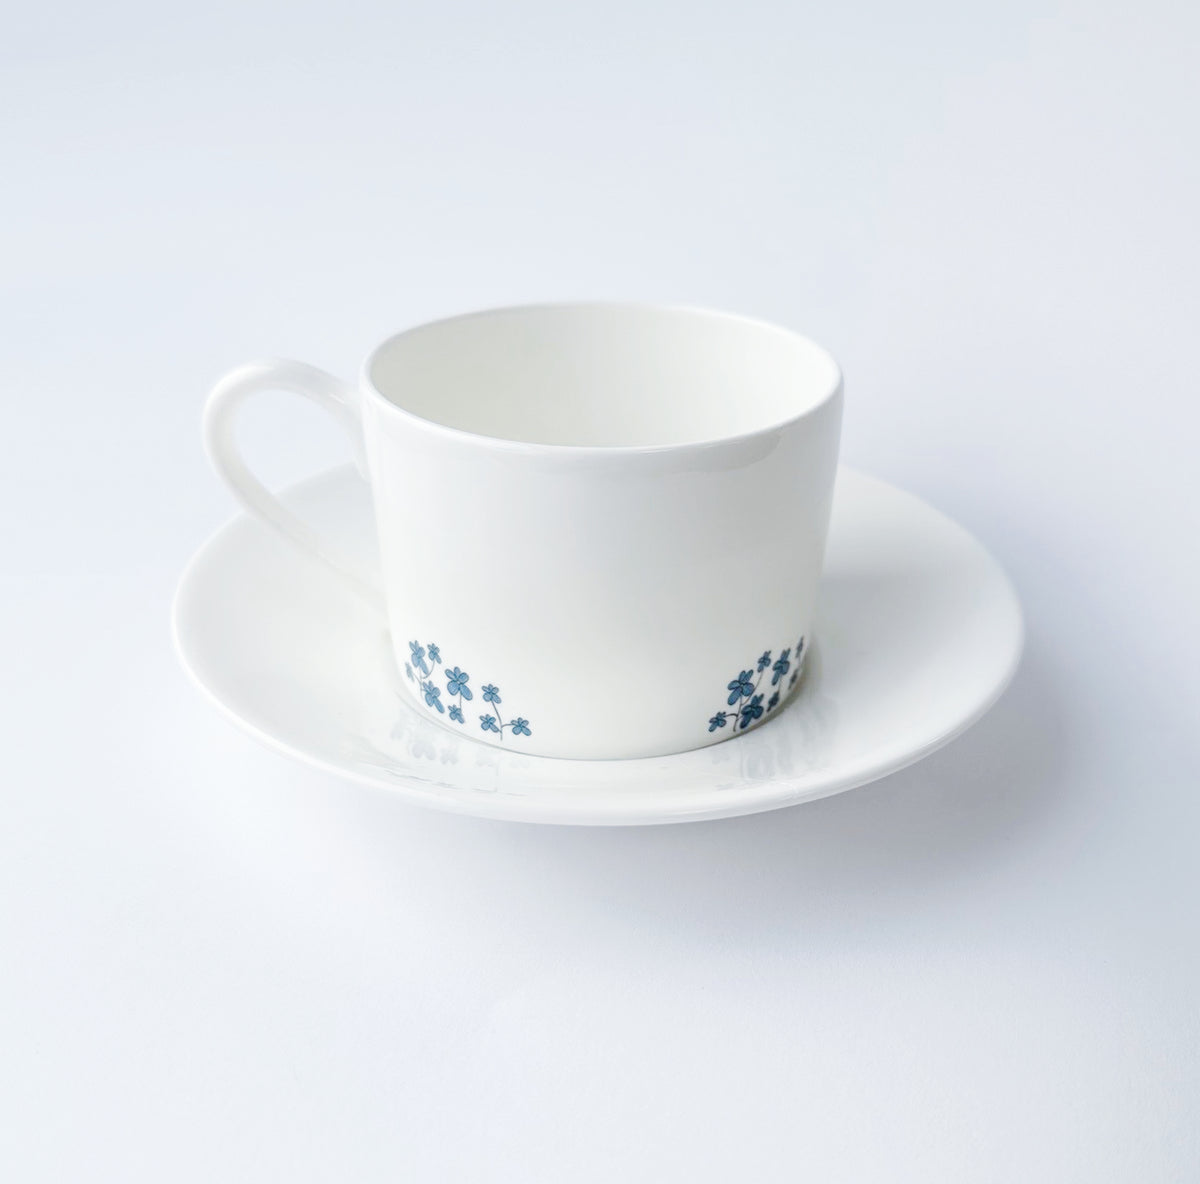 Forget-me-not cup and saucer